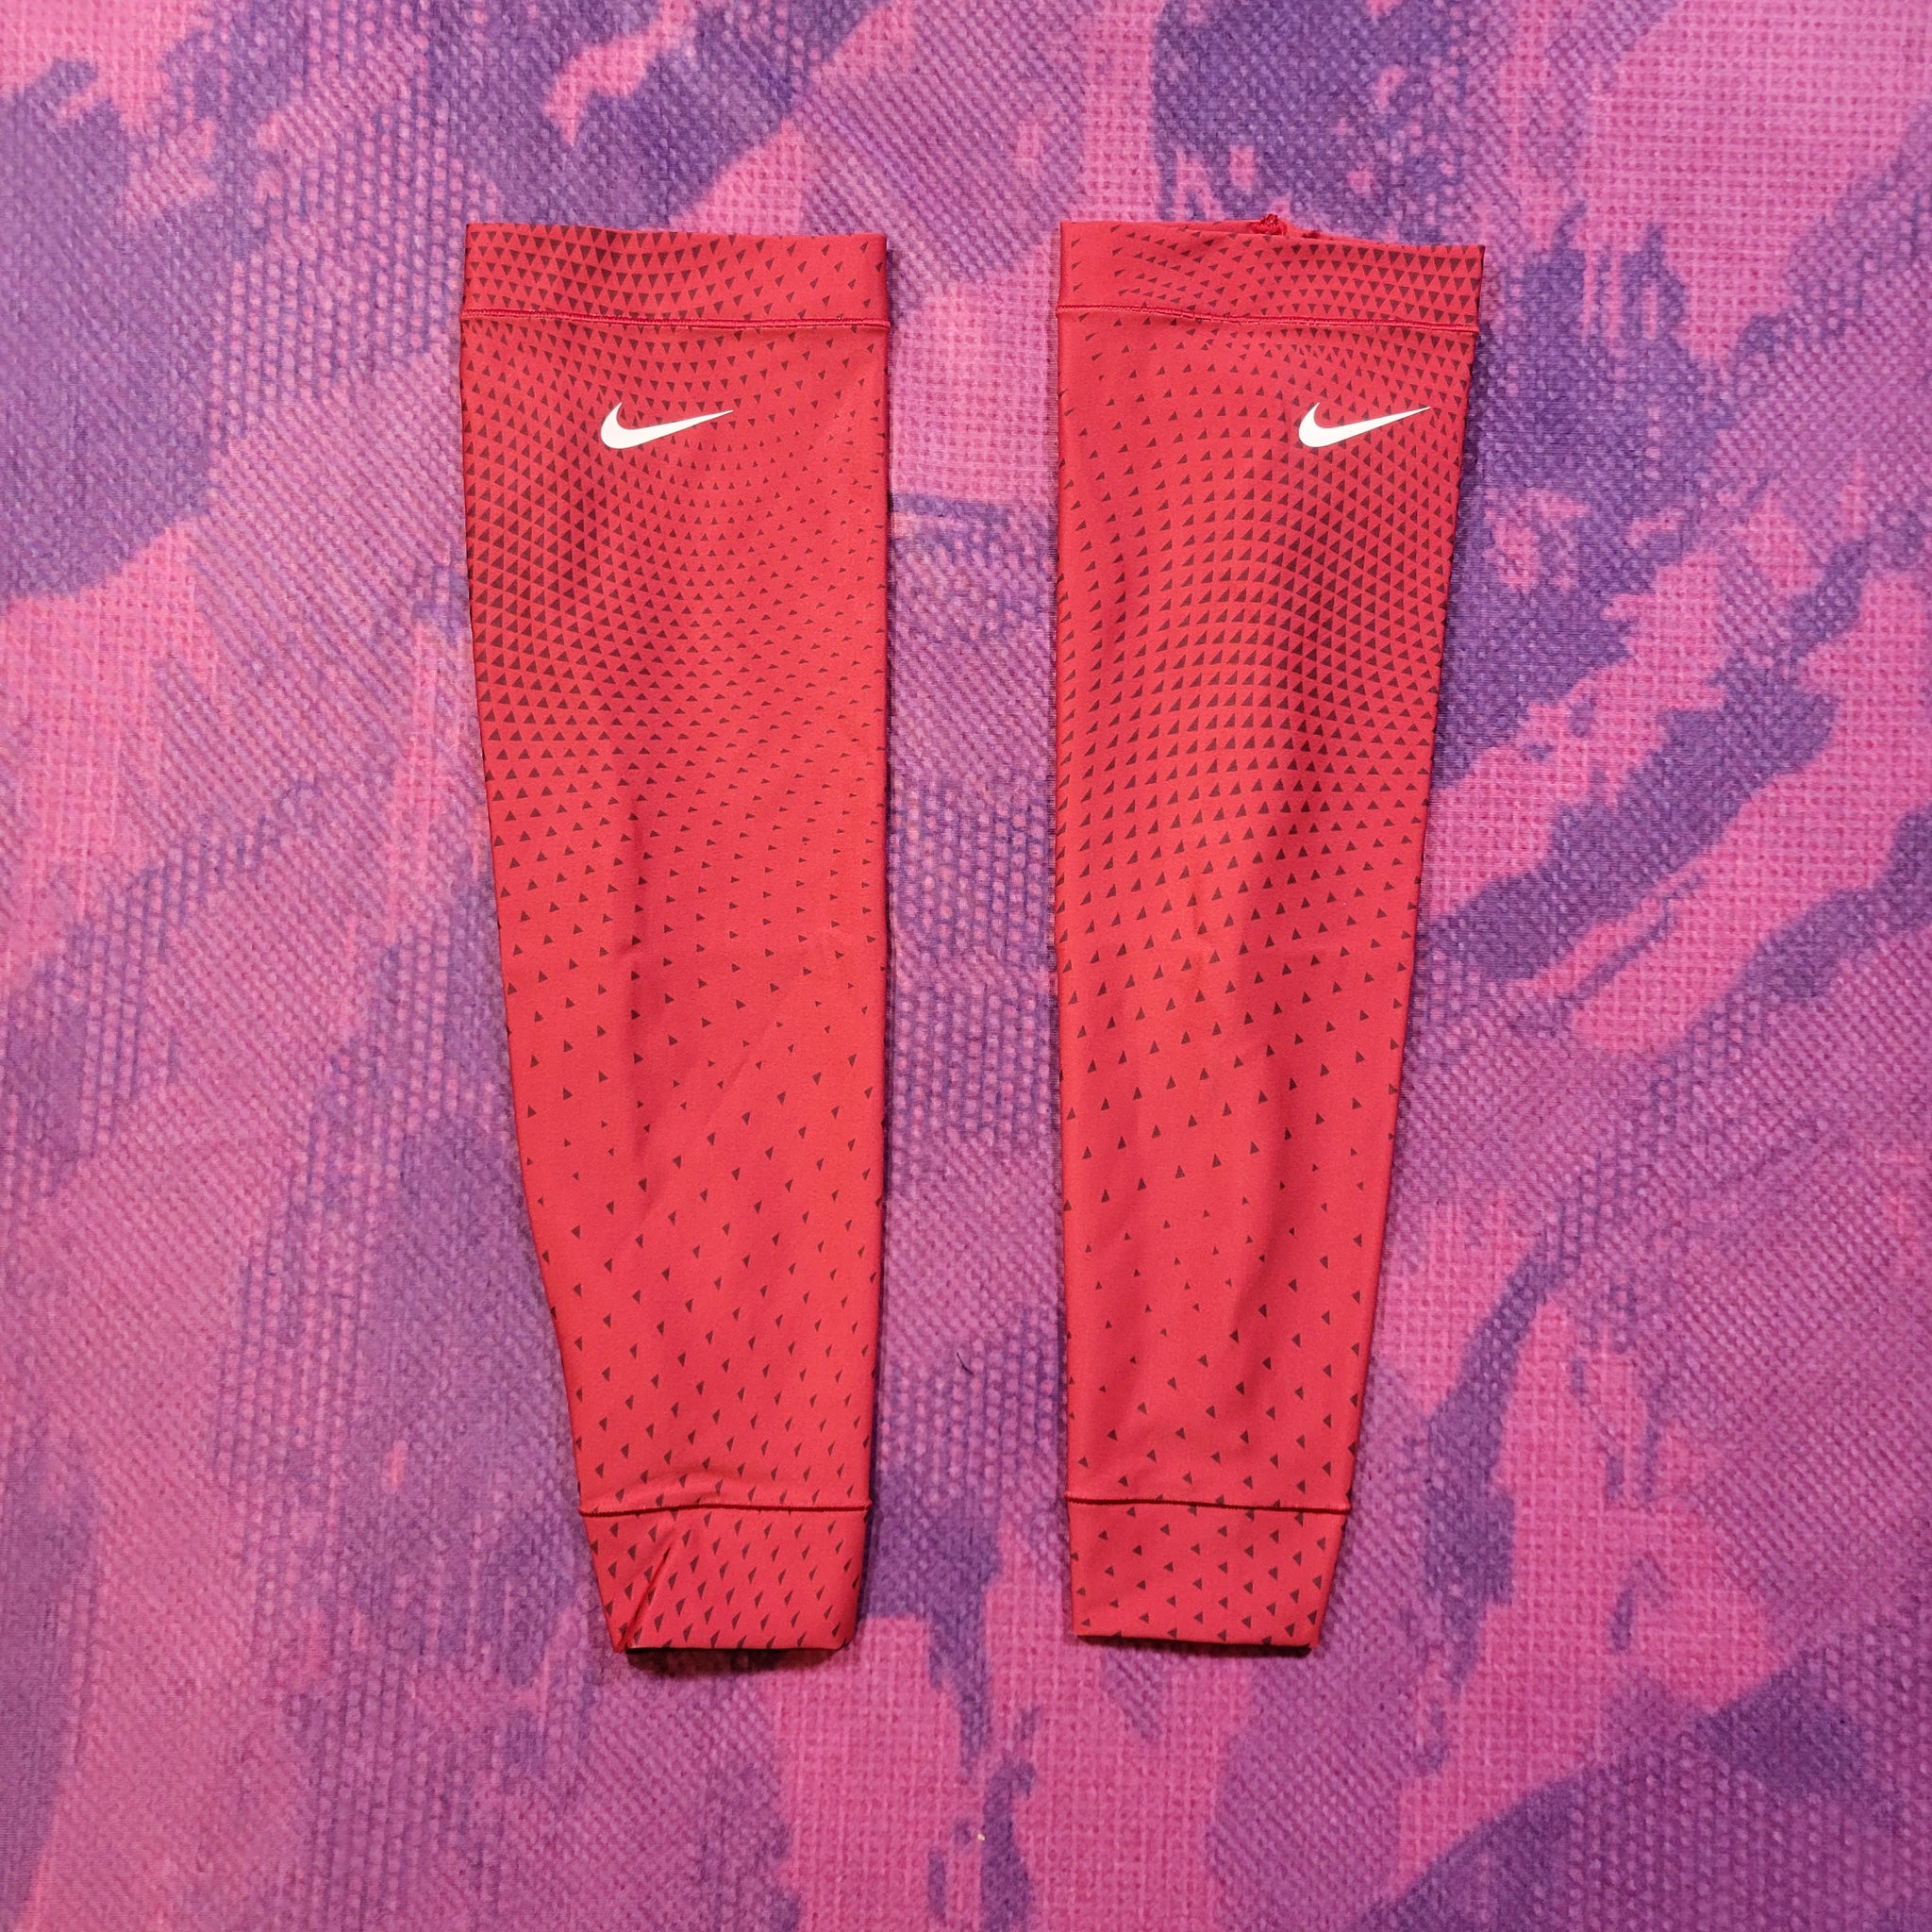 2018 Nike BTC Bowerman Track Club Pro Elite Arm and Calf Sleeves Set ( –  Bell Lap Track and Field